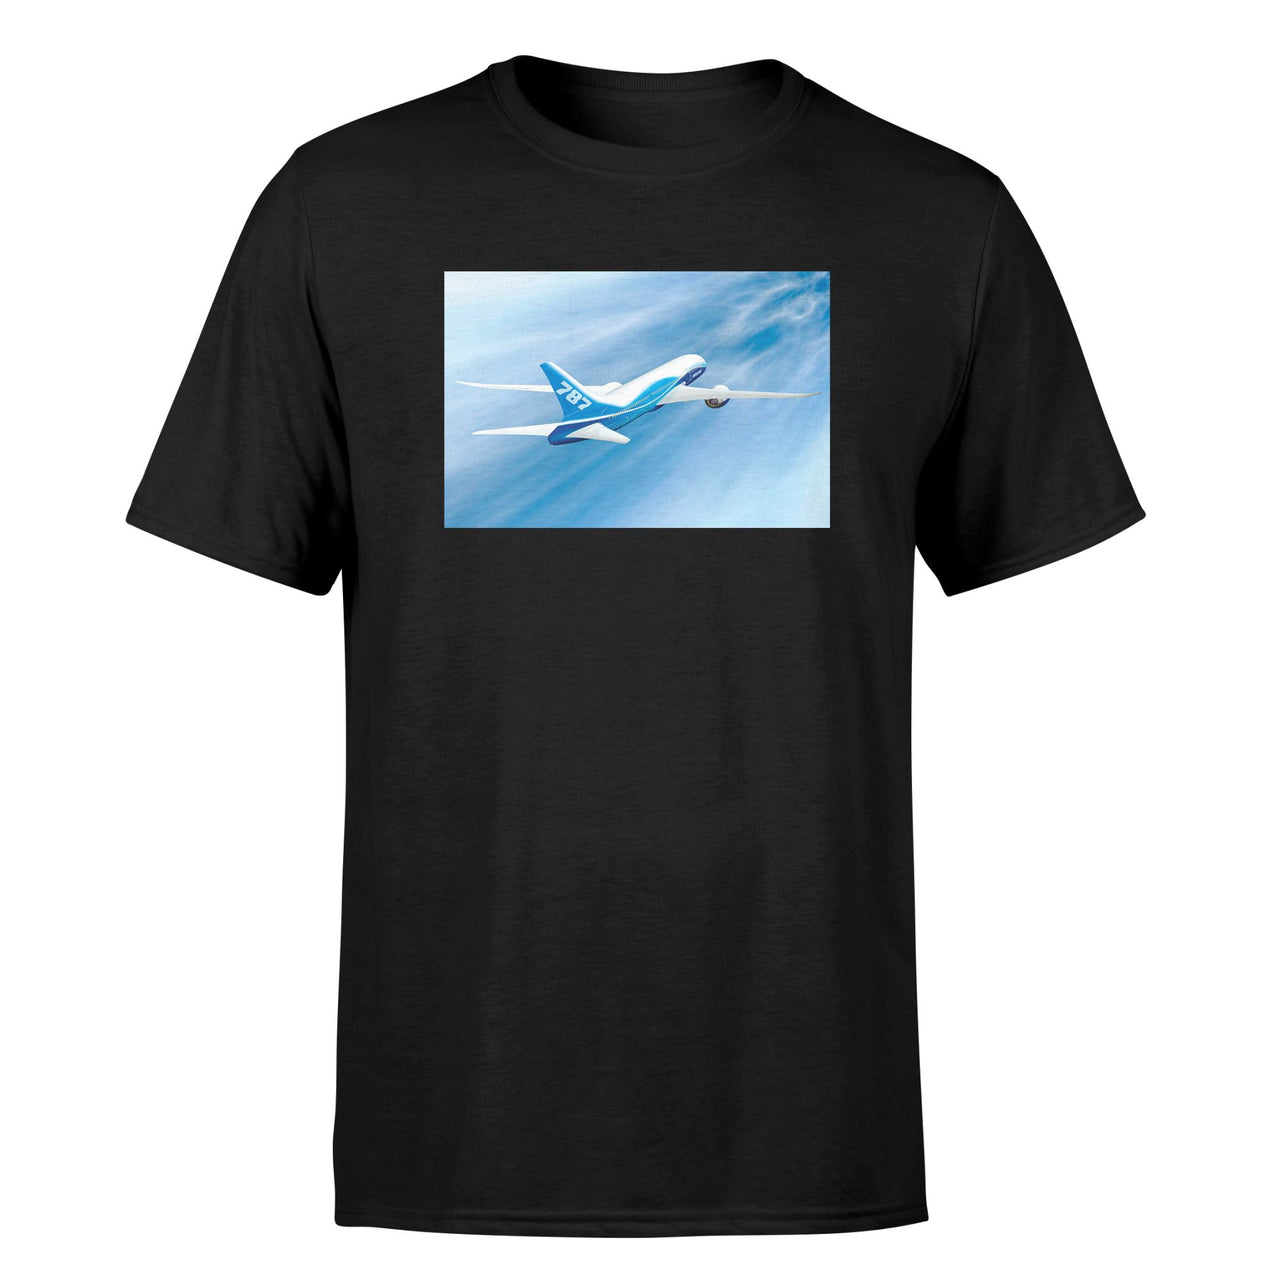 Beautiful Painting of Boeing 787 Dreamliner Designed T-Shirts